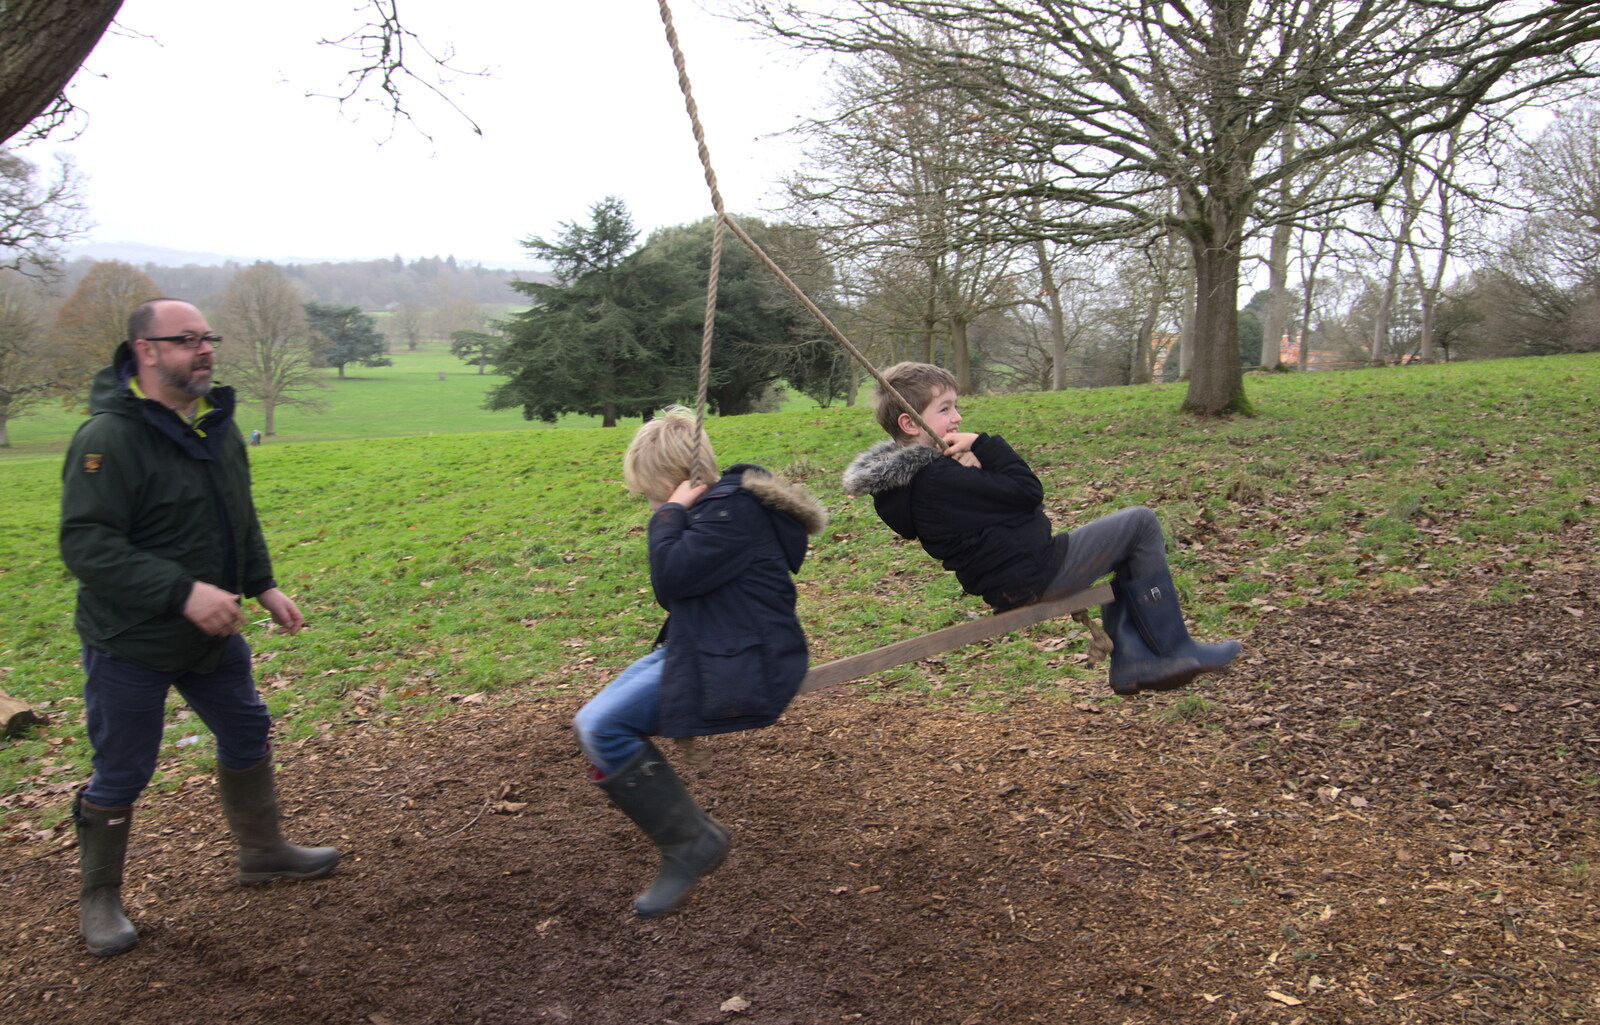 The boys have a swing from Killerton House, Broadclyst, Devon - 30th December 2017